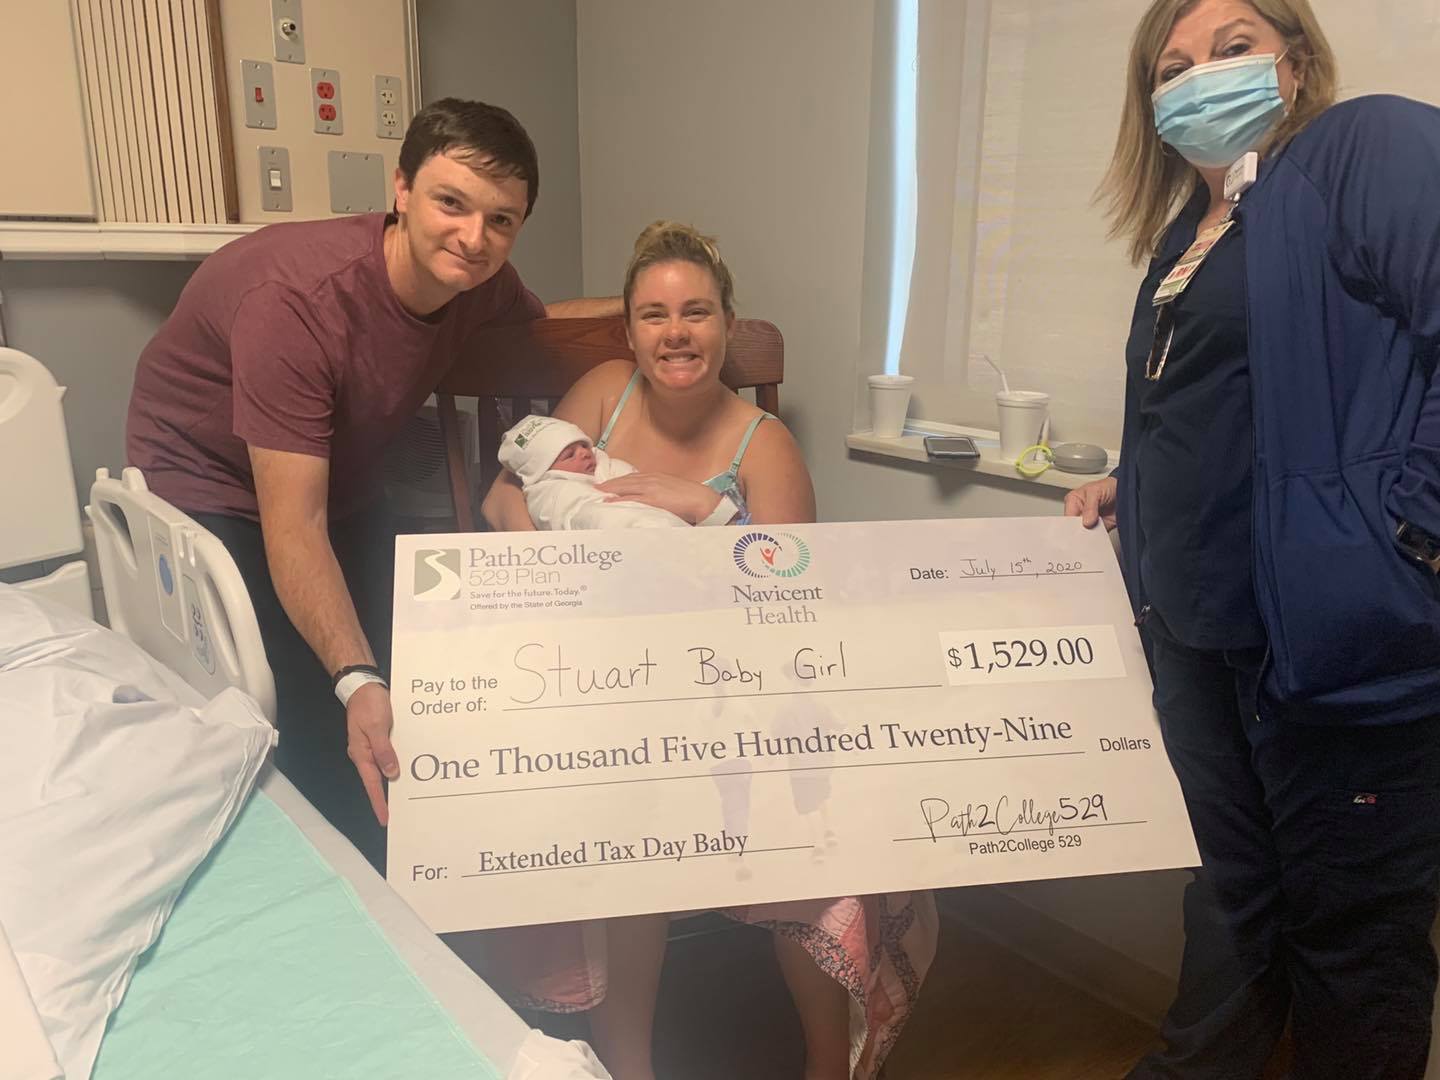 Family with newborn baby poses with Path2college donation check